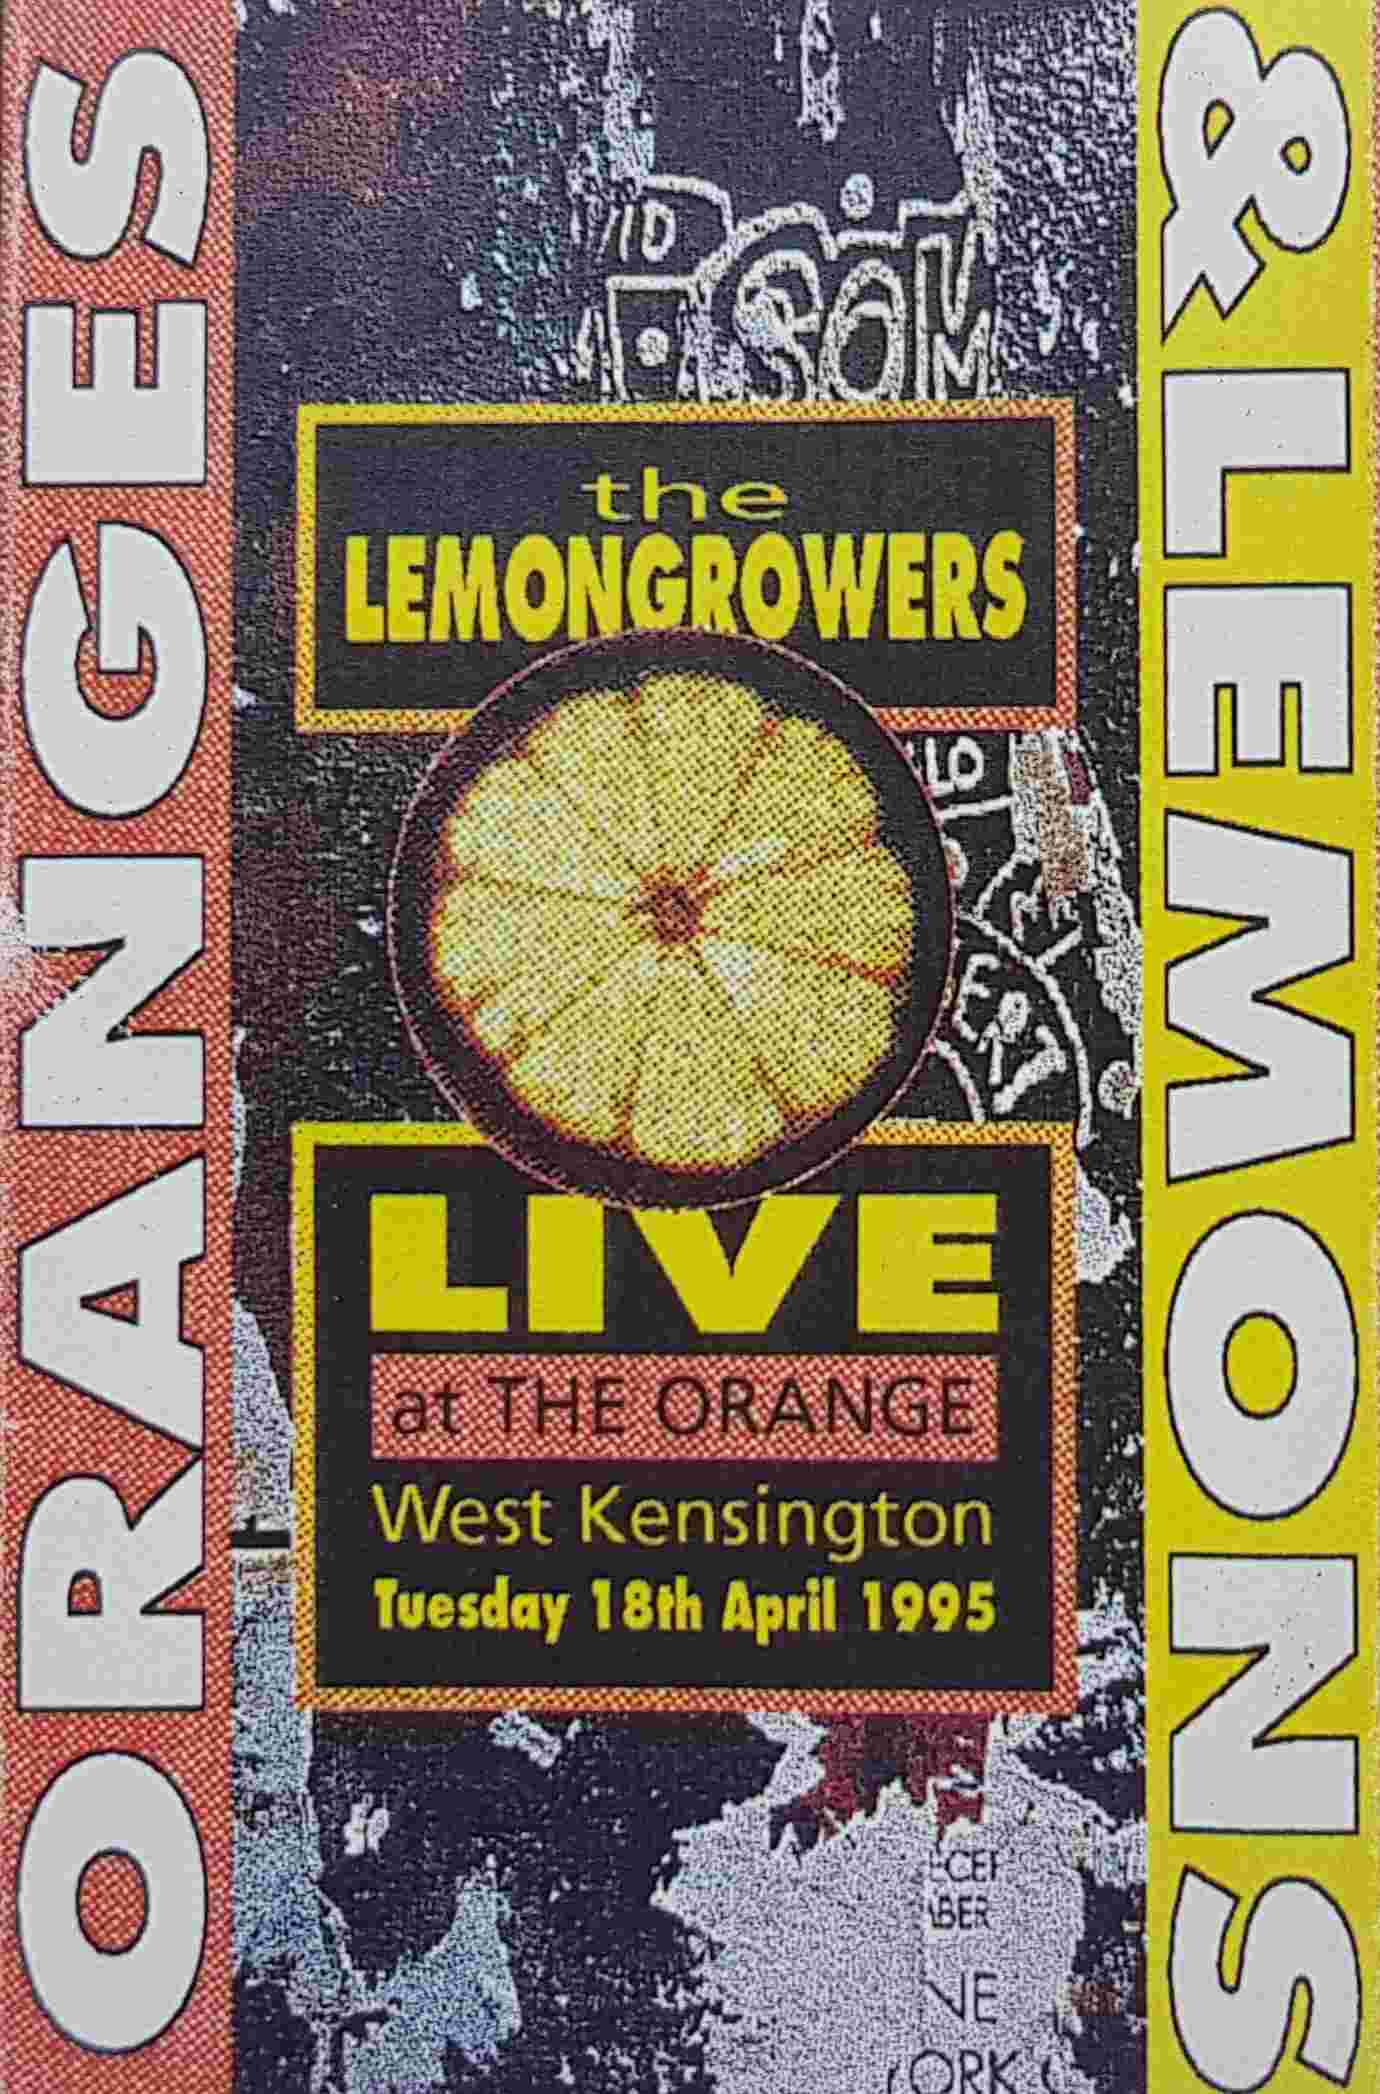 Picture of Oranges and lemons - Live (20 only) by artist The Lemon Growers 